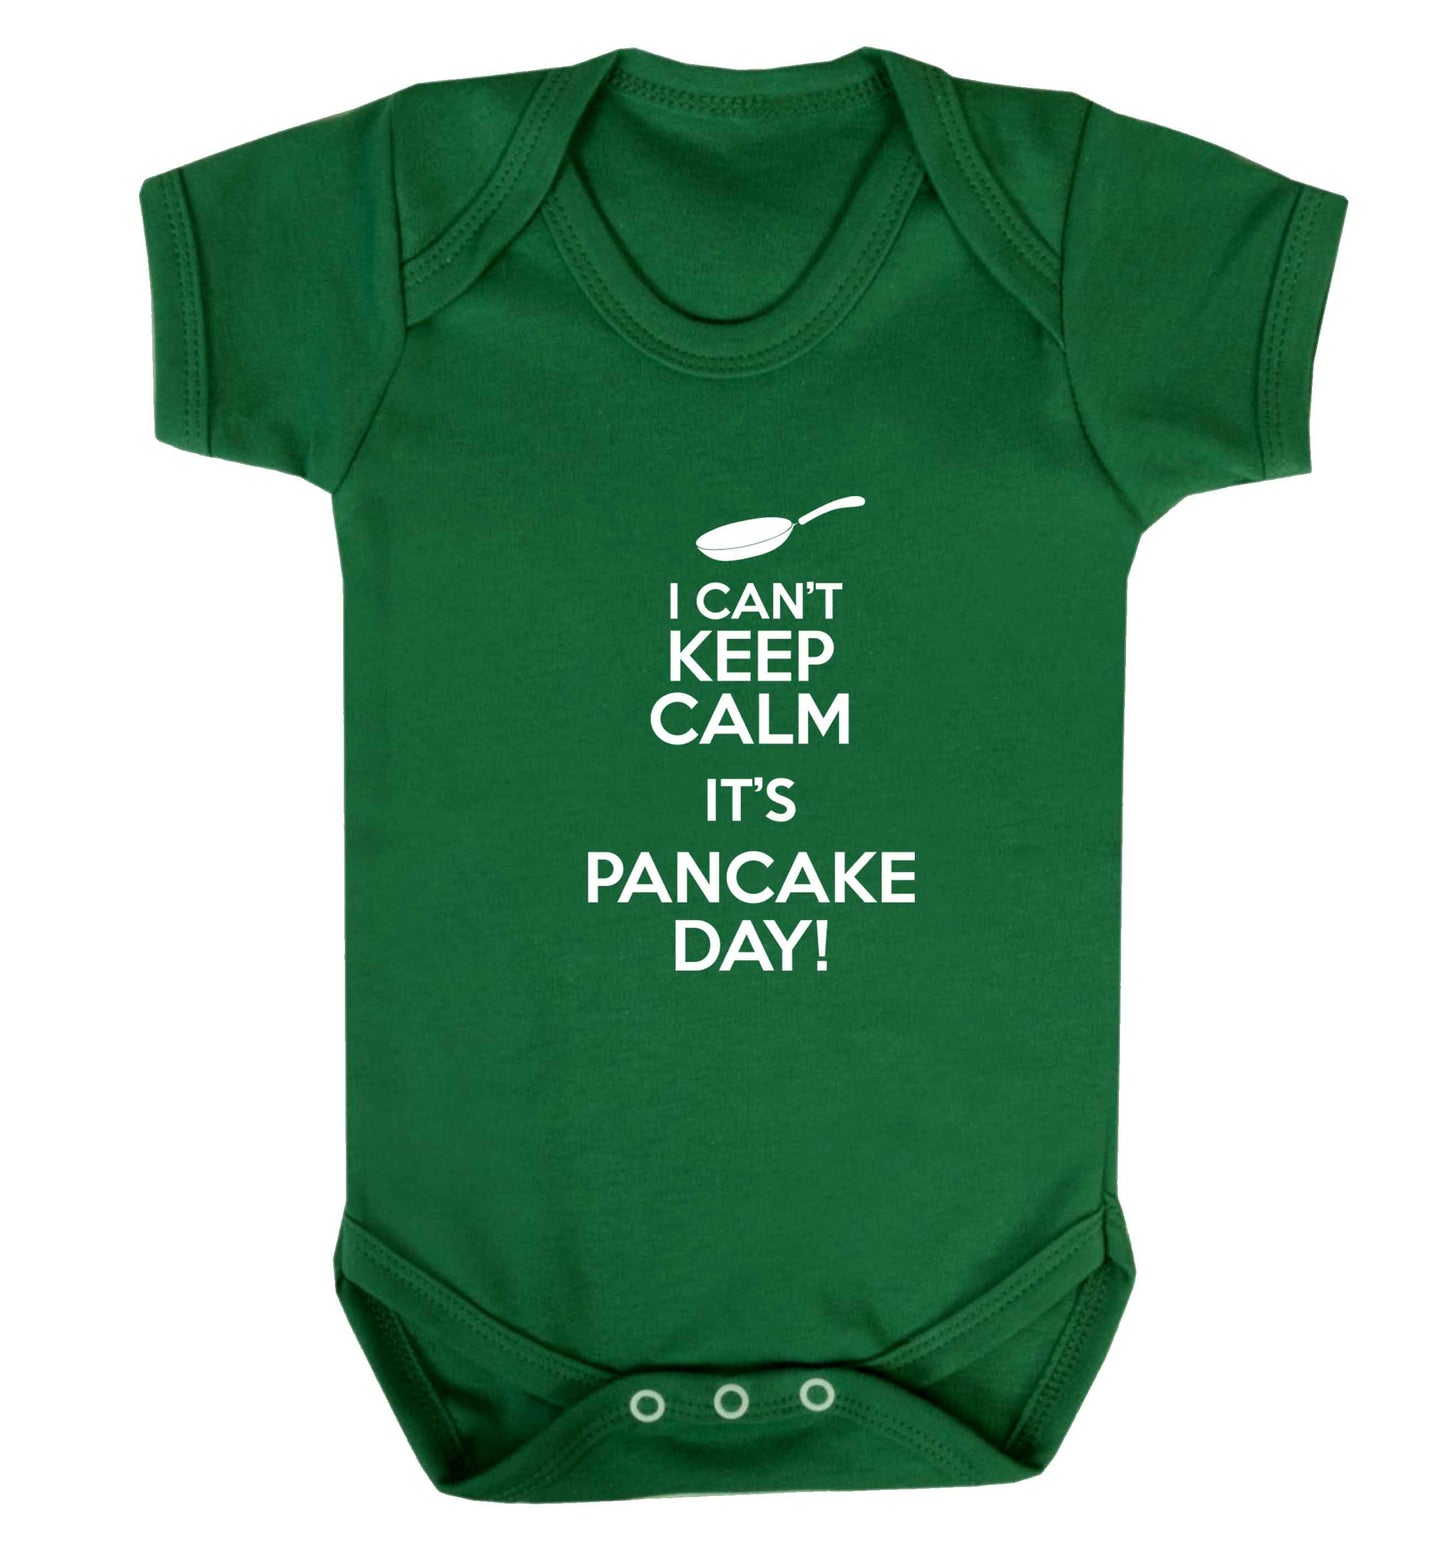 I can't keep calm it's pancake day! baby vest green 18-24 months